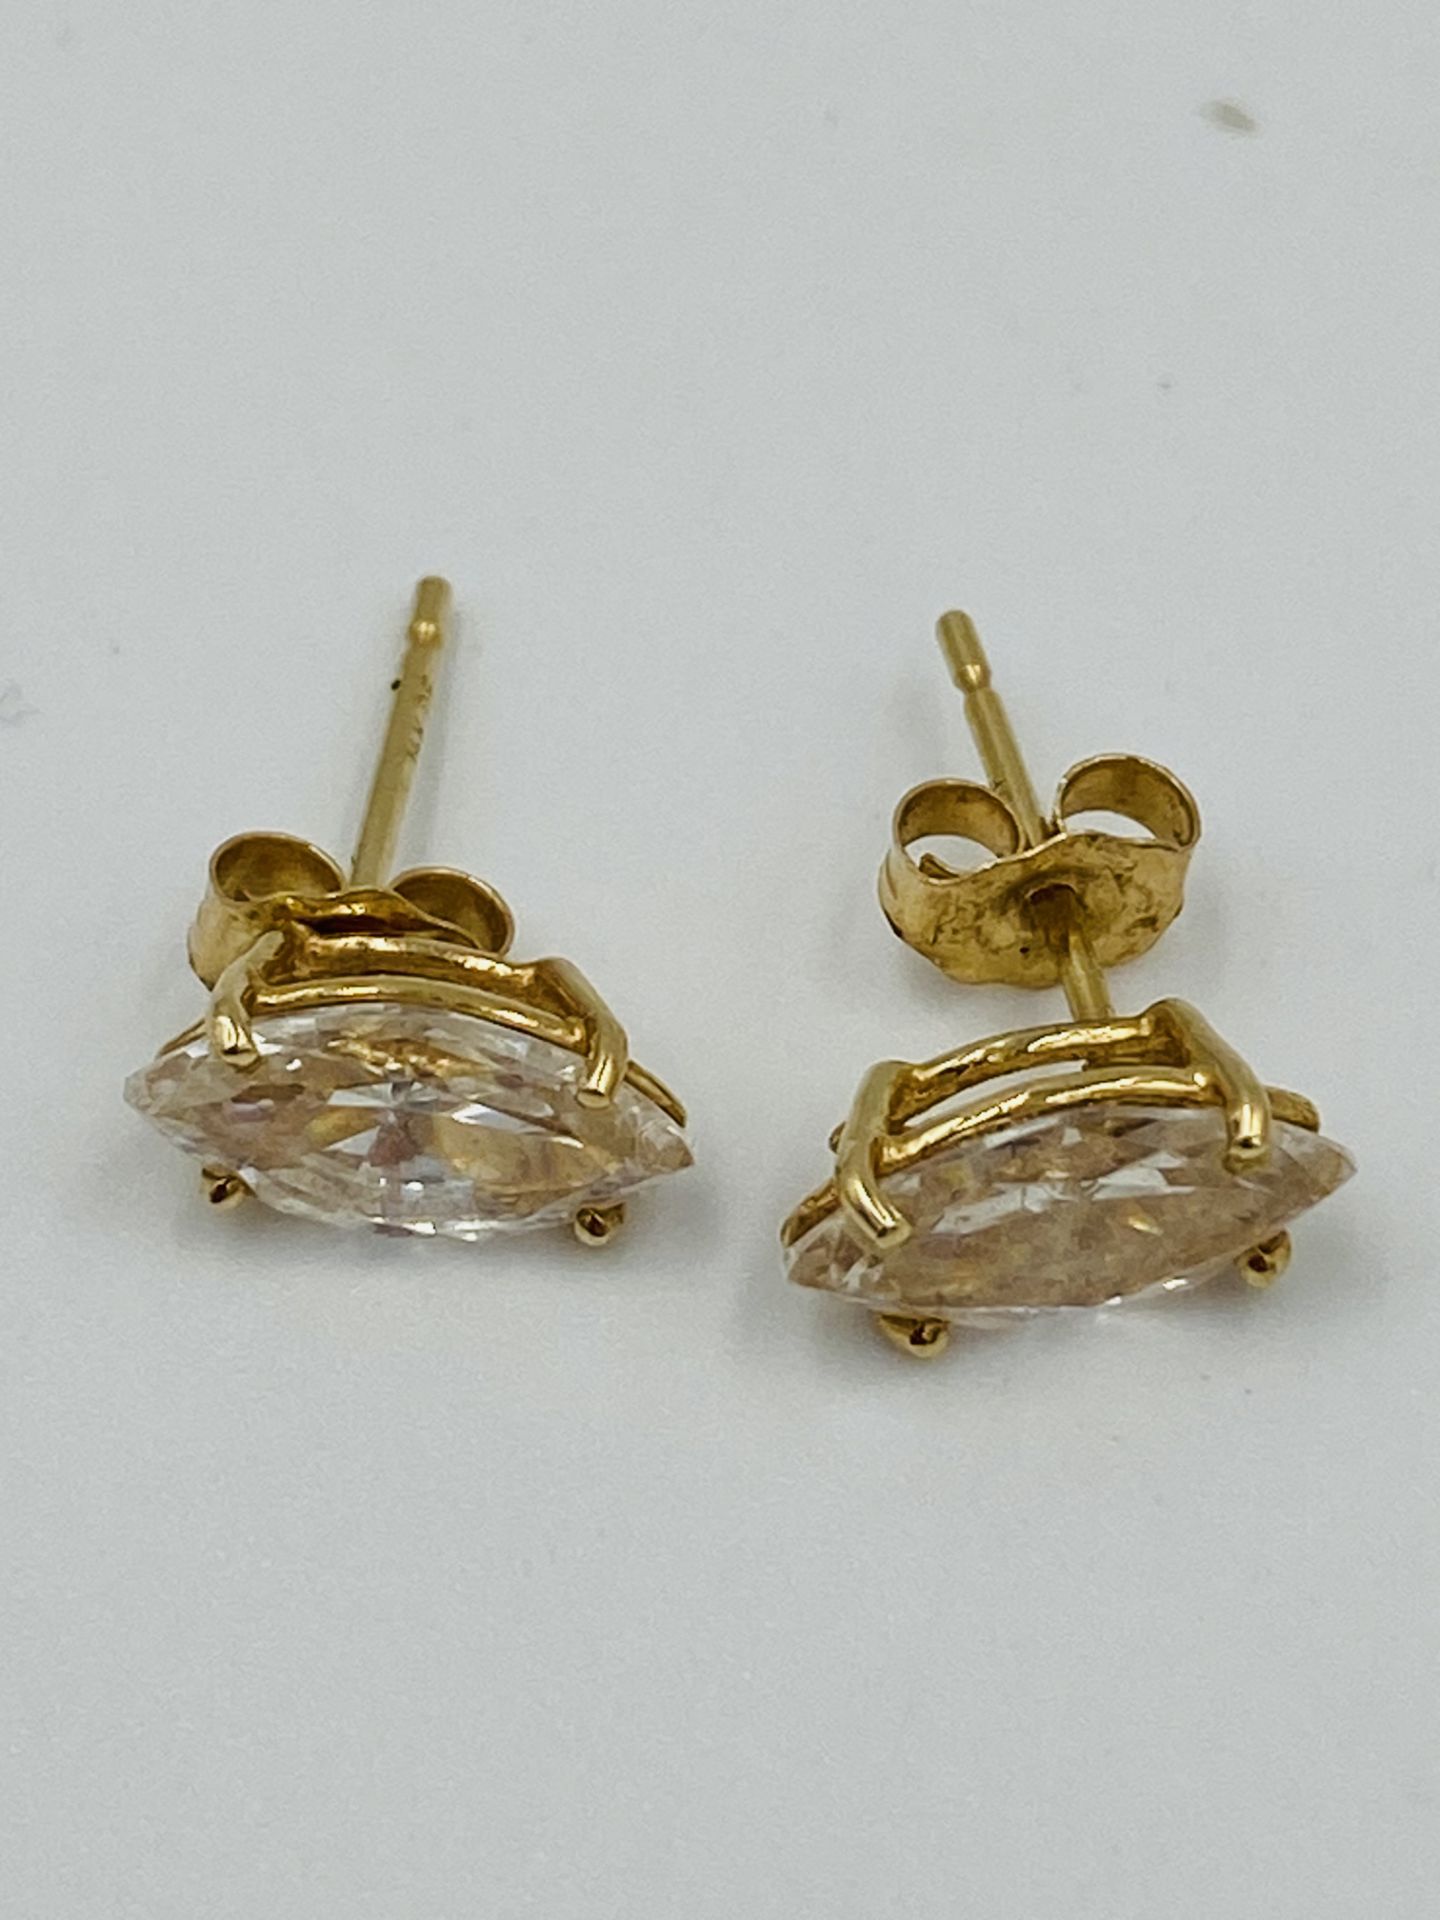 Pair of 14ct gold earrings set with a white stone - Image 3 of 4